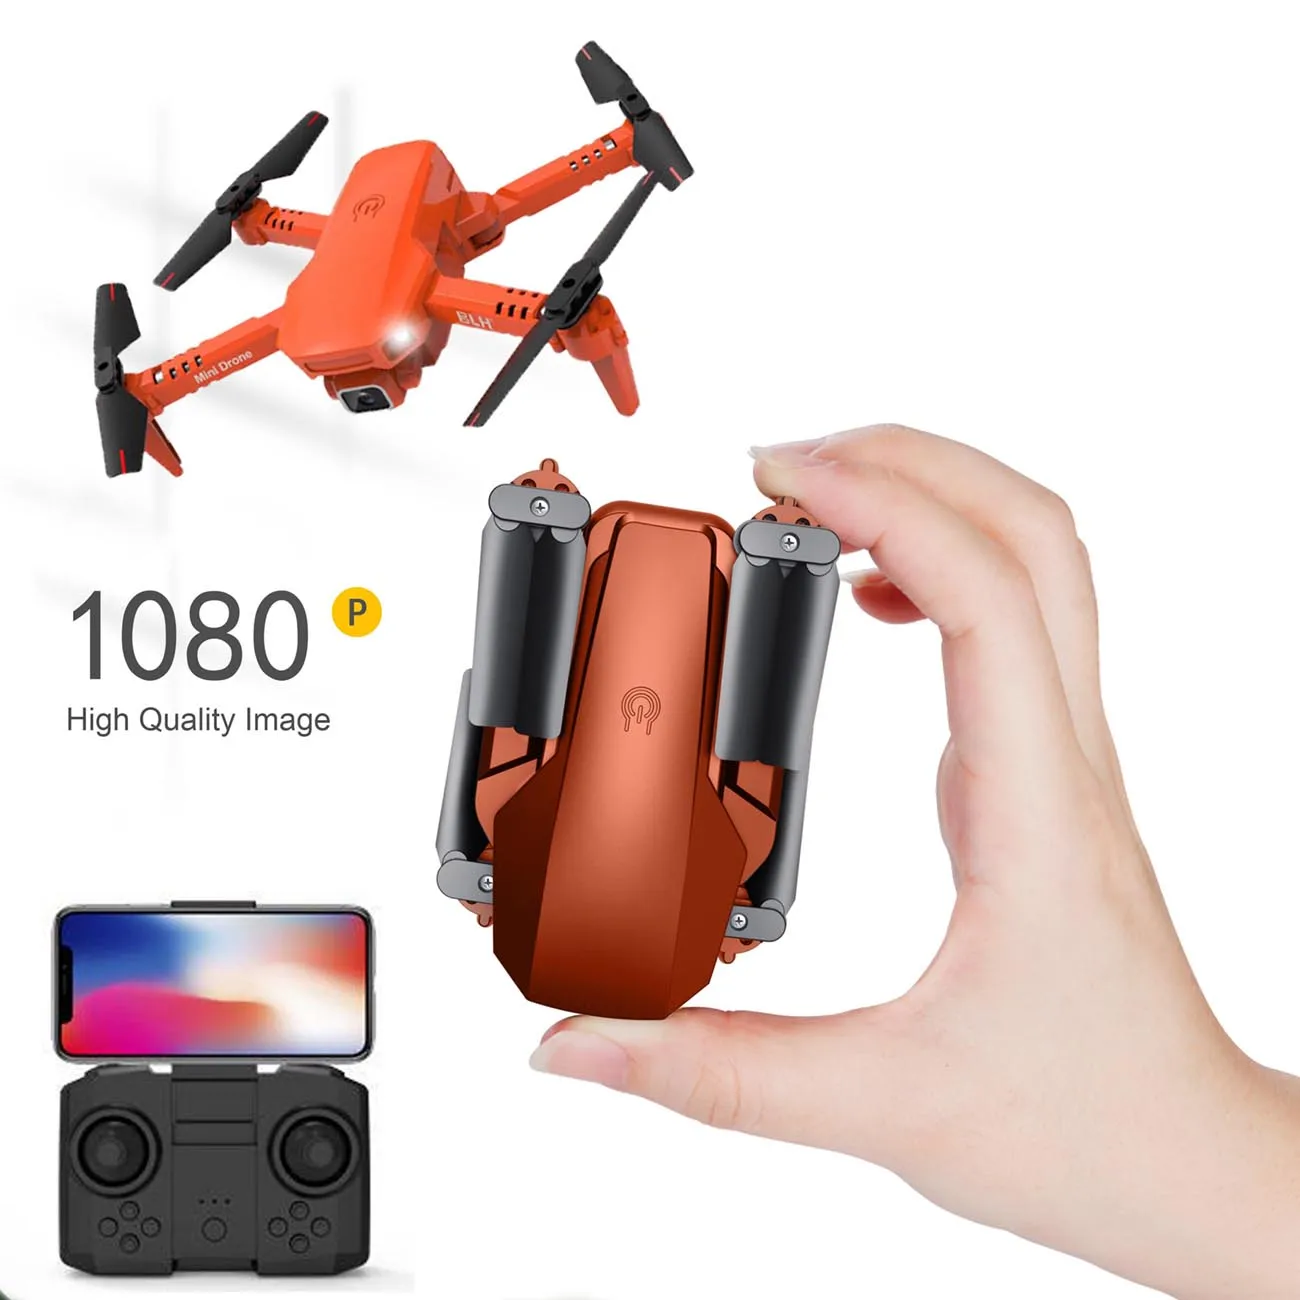 

2020 NEW E88 4k HD Drone With wide-angle camera drone WiFi 1080p real-time transmission FPV drone follow me rc Quadcopter, Black,orange